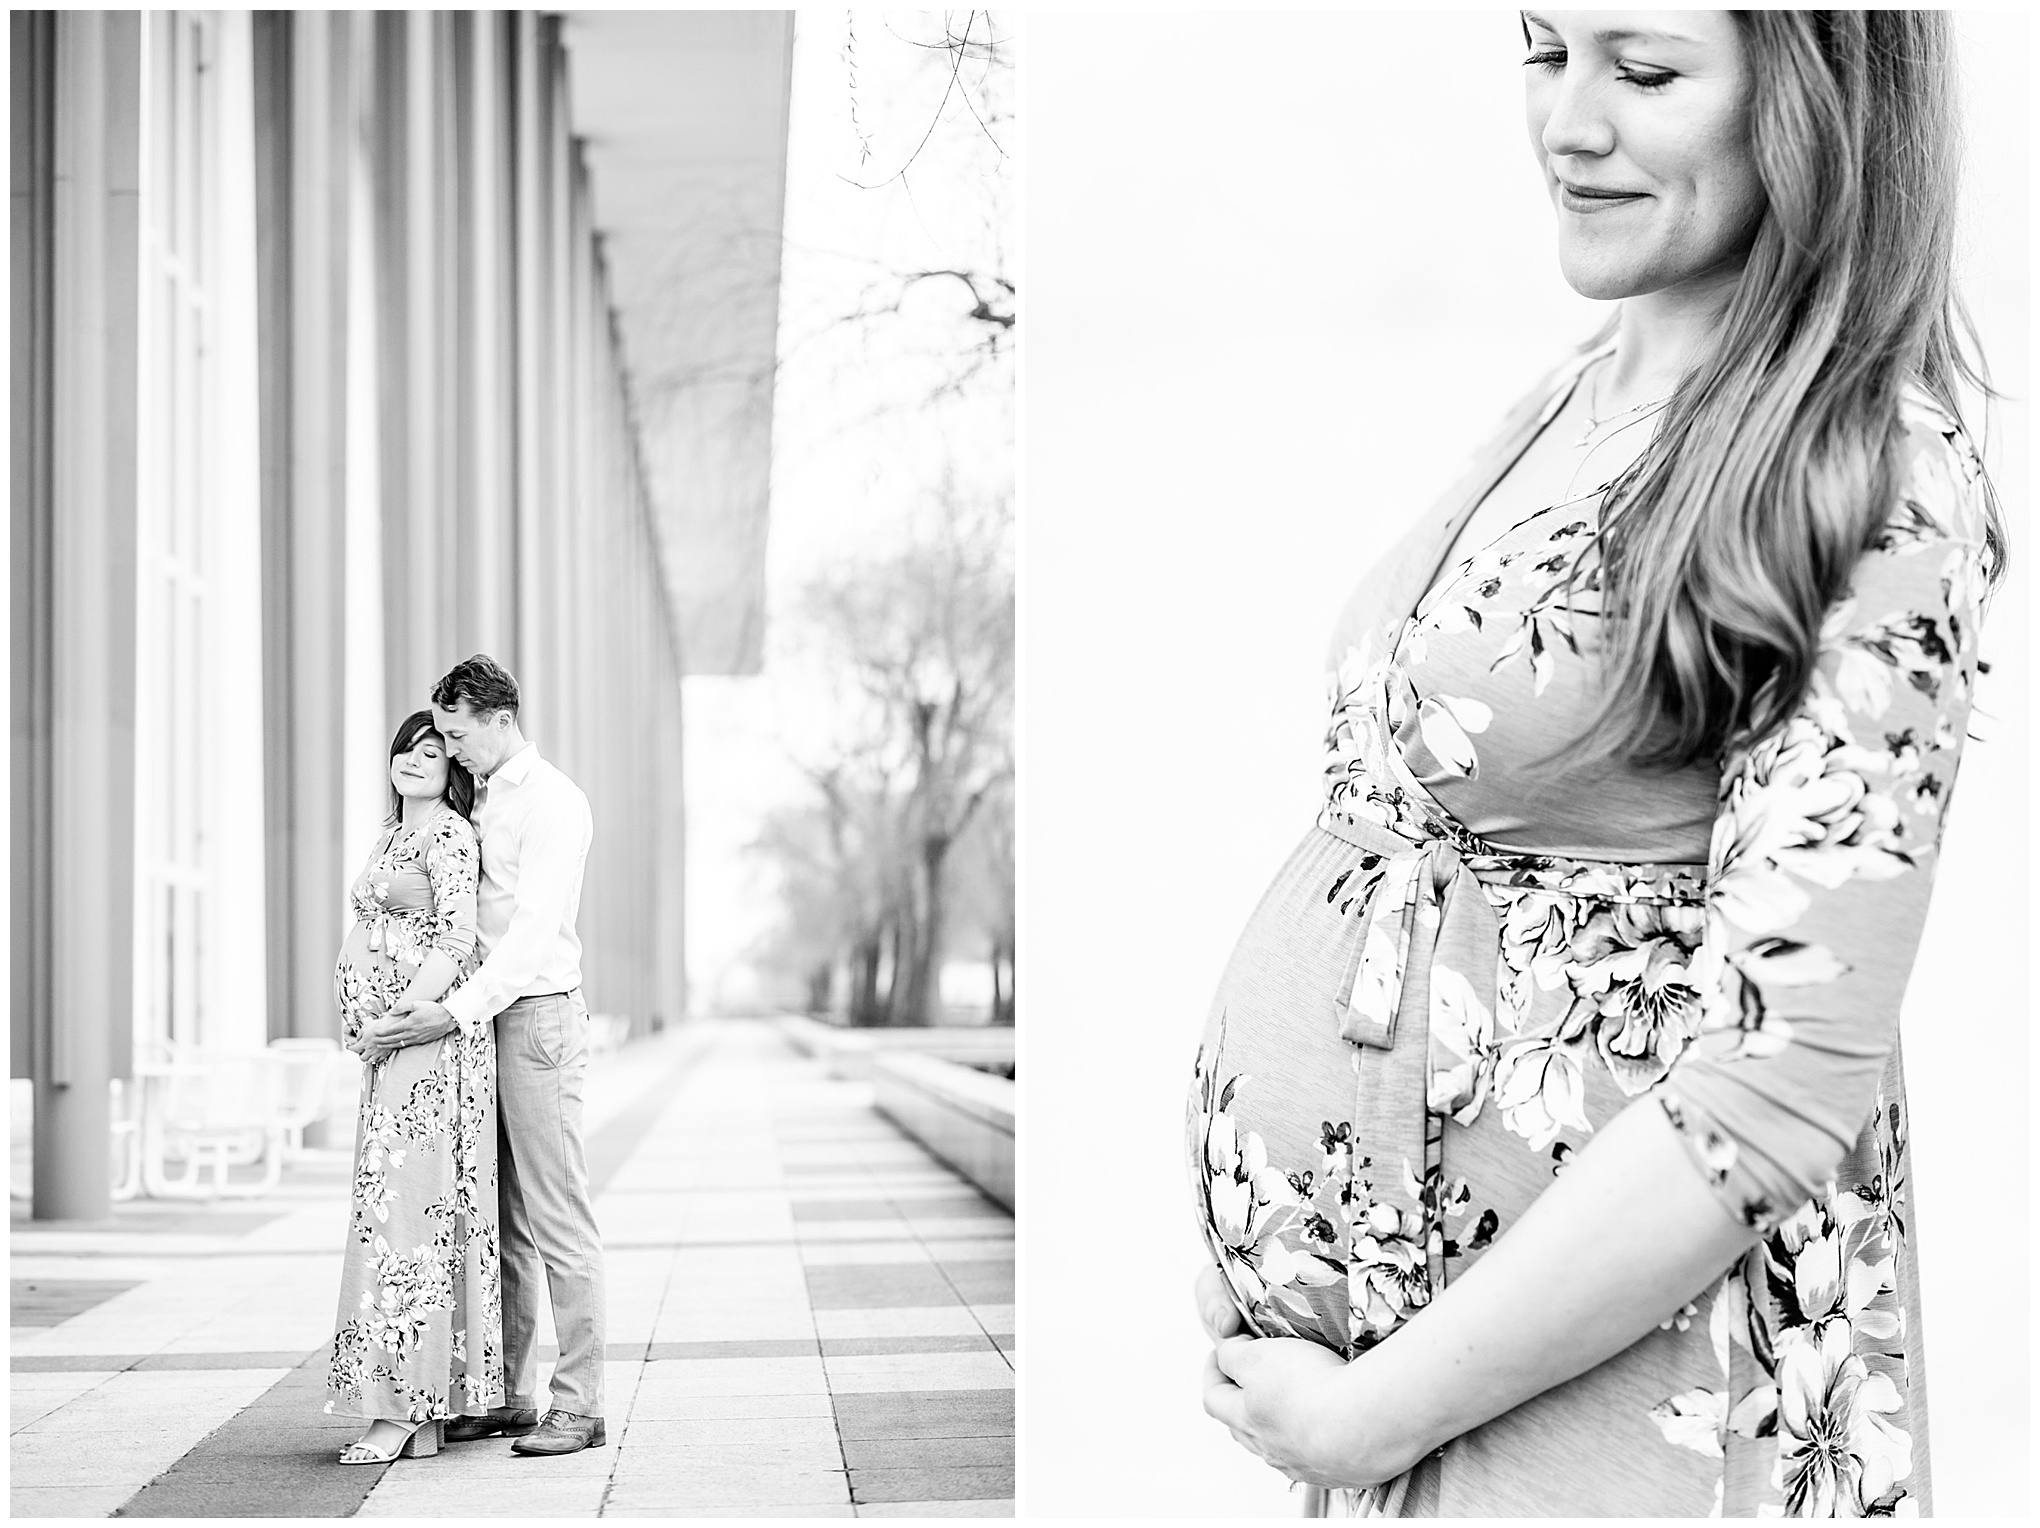 DC cherry blossoms maternity session, D.C. photos, spring maternity photos, sunrise maternity photos, DC sunrise, DC maternity photos, cherry blossoms maternity photos, Rachel E.H. Photography, maternity session style, maternity photos outfit ideas, Kennedy Center maternity photos, black and white maternity photos, pregnancy photos